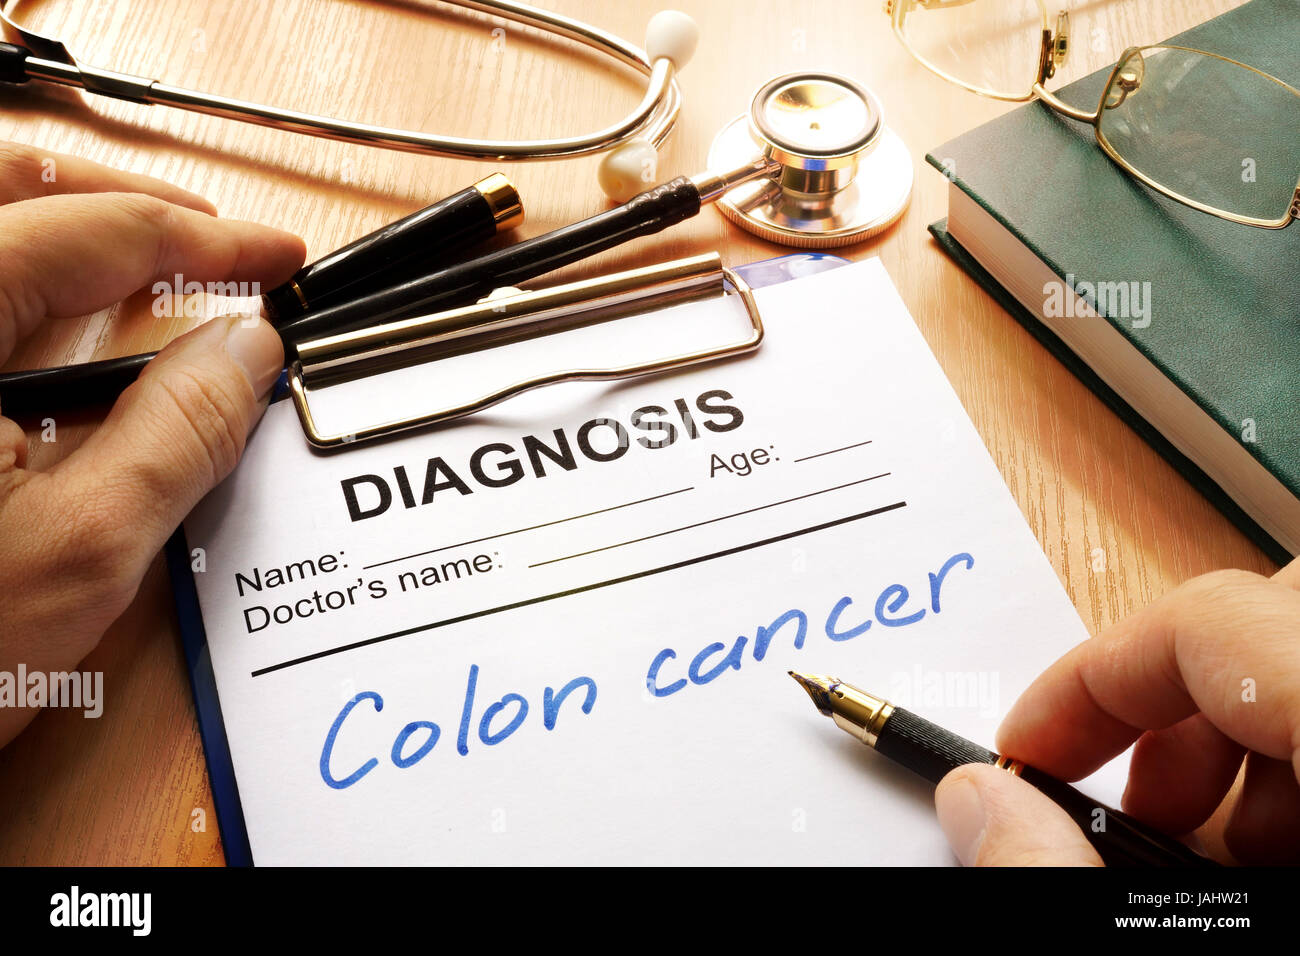 A diagnostic form with words Colon cancer. Stock Photo